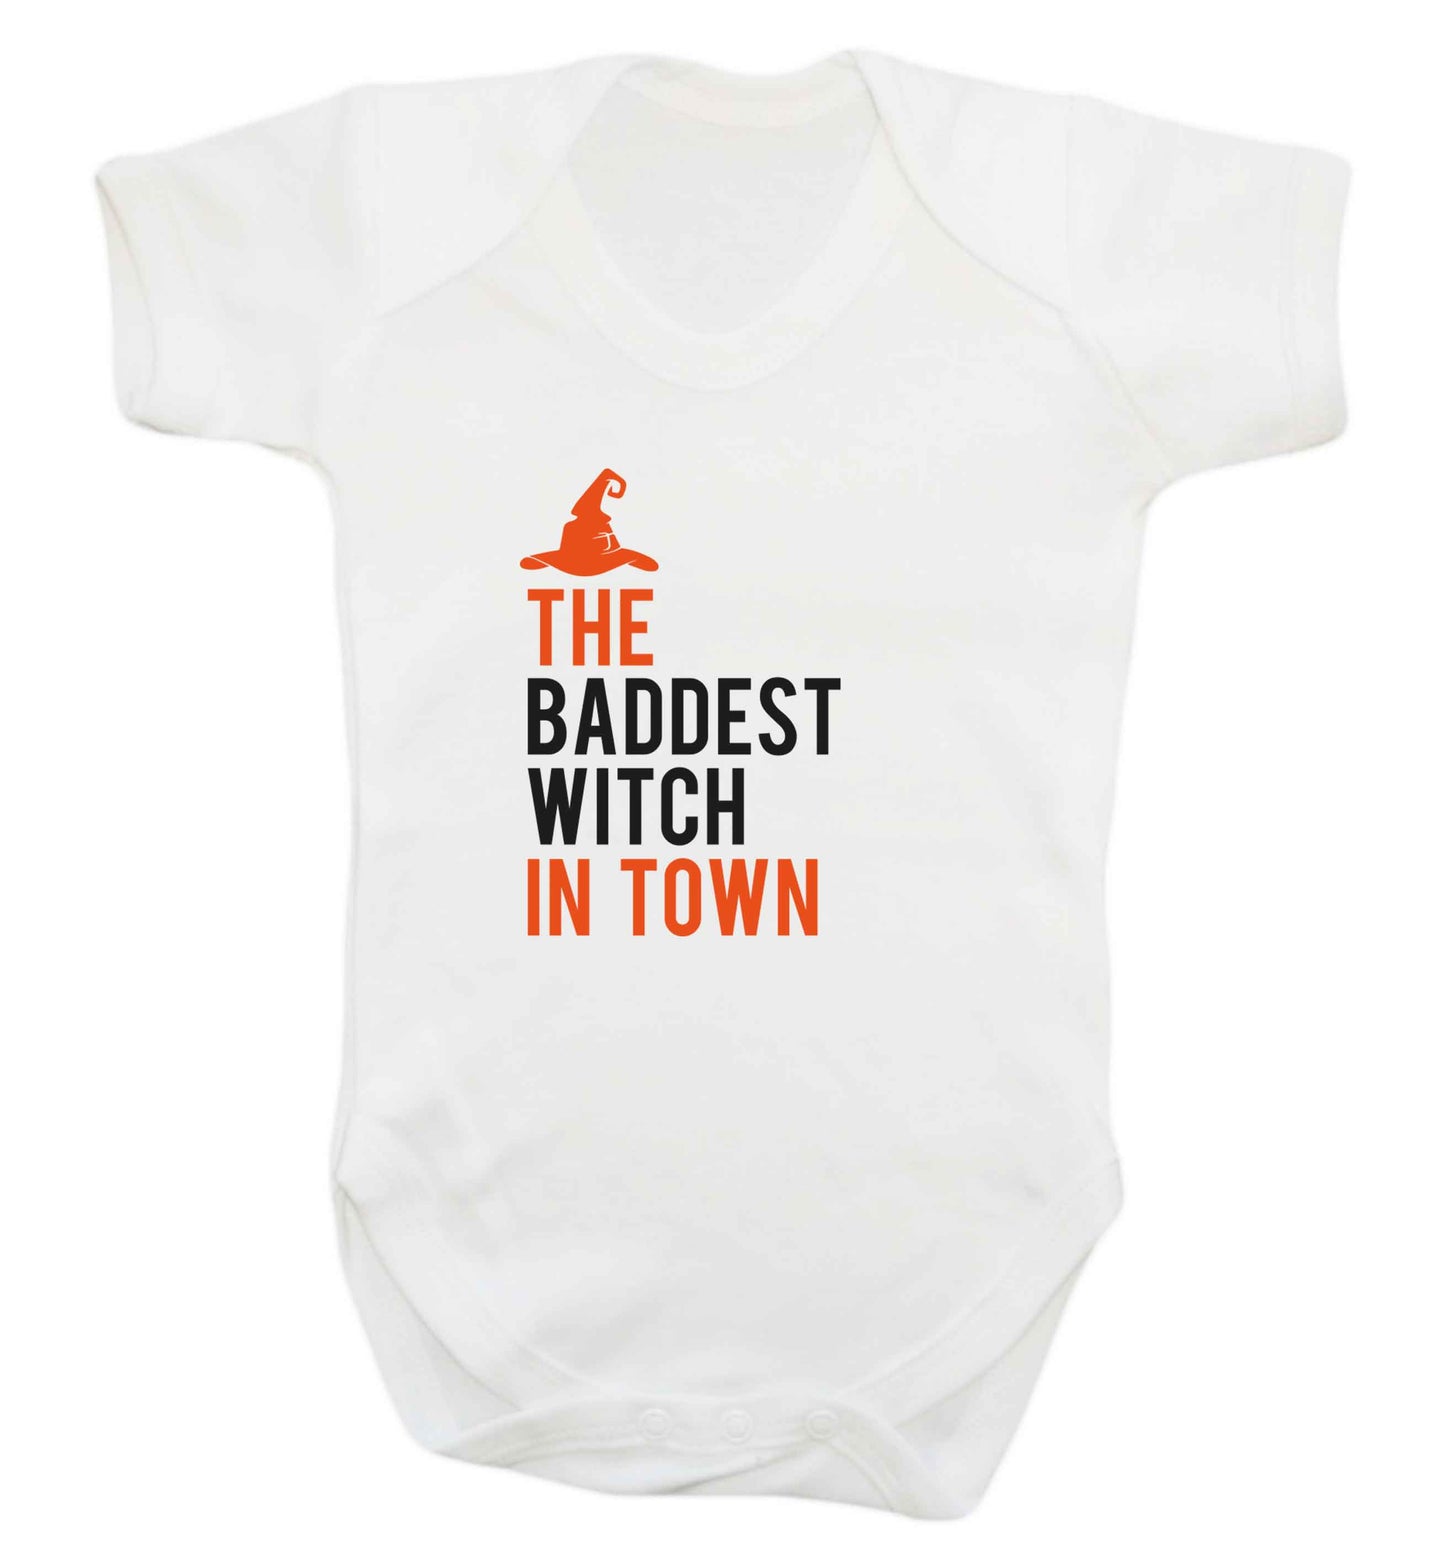 Badest witch in town baby vest white 18-24 months